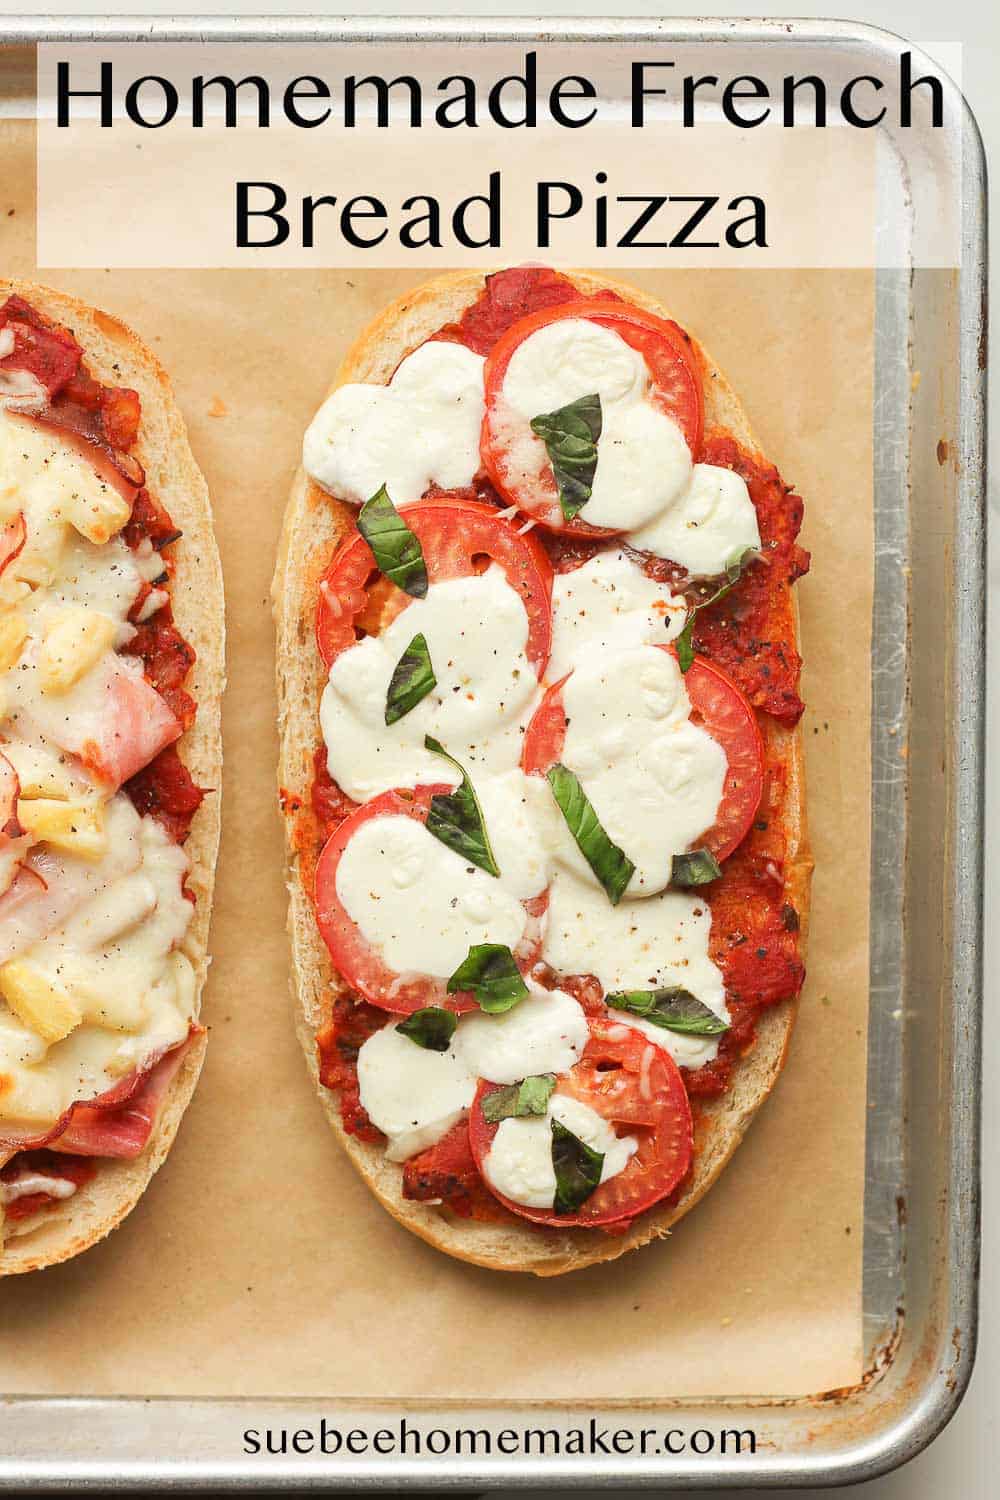 A margherita French bread pizza on a baking sheet.